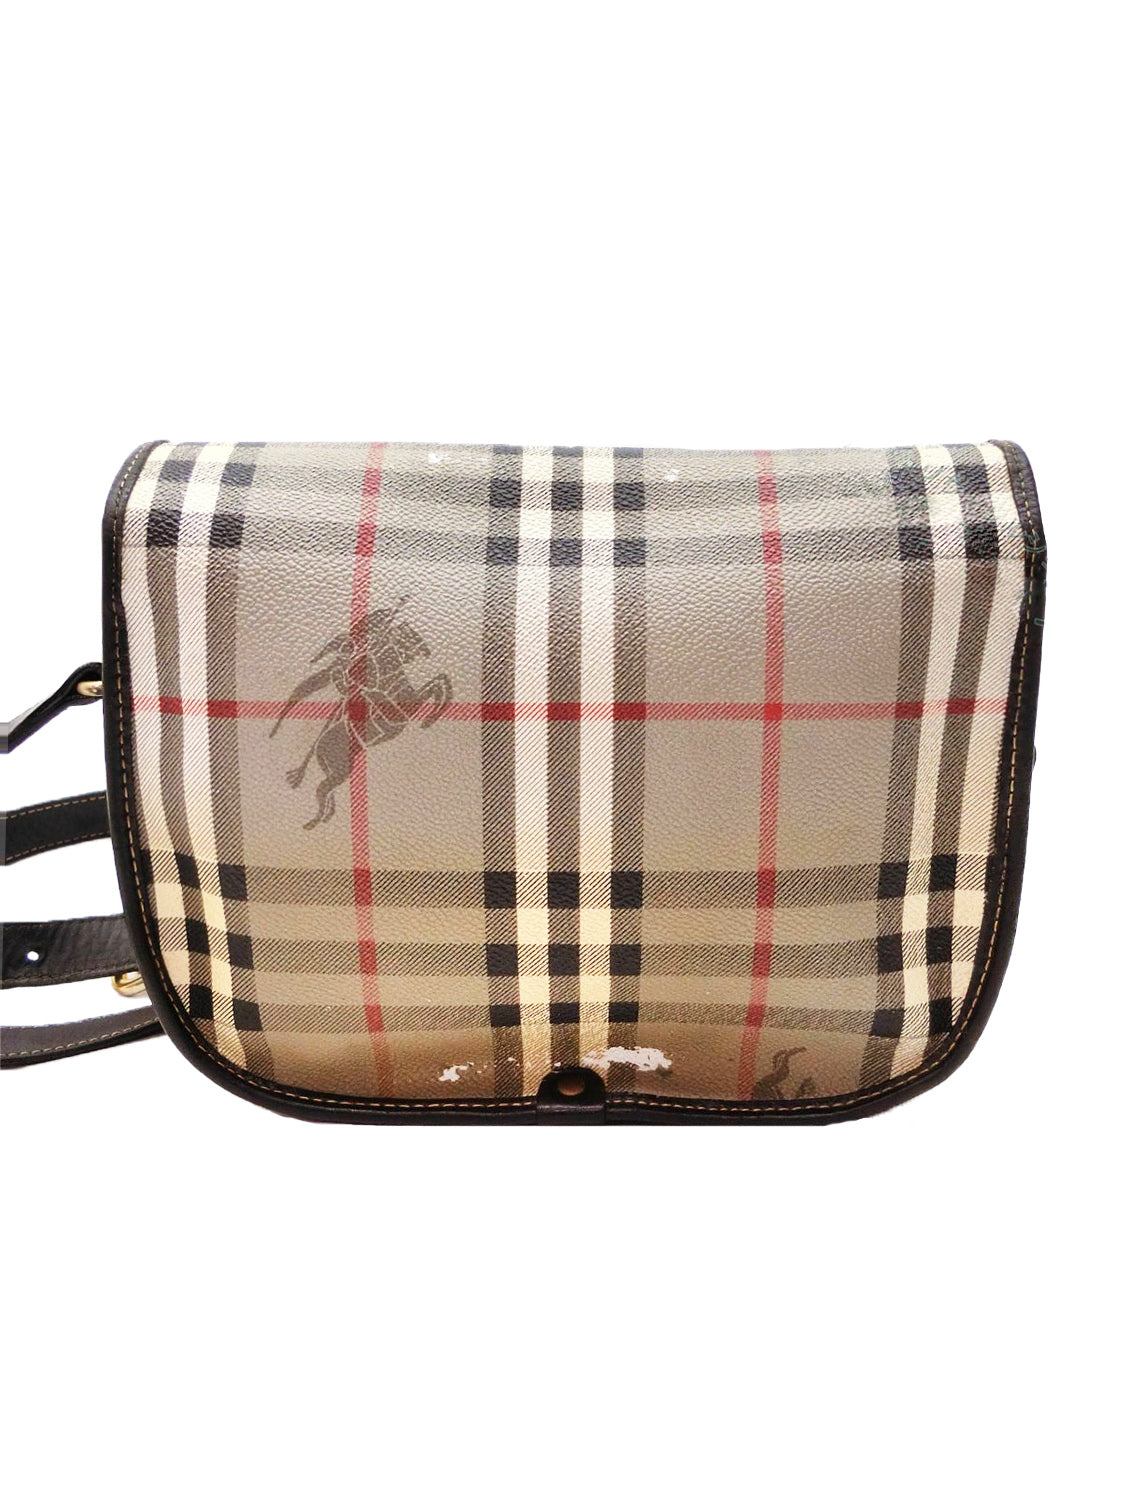 Burberry 2000s Plaid Black and Gray Shoulder Leather Bag · INTO